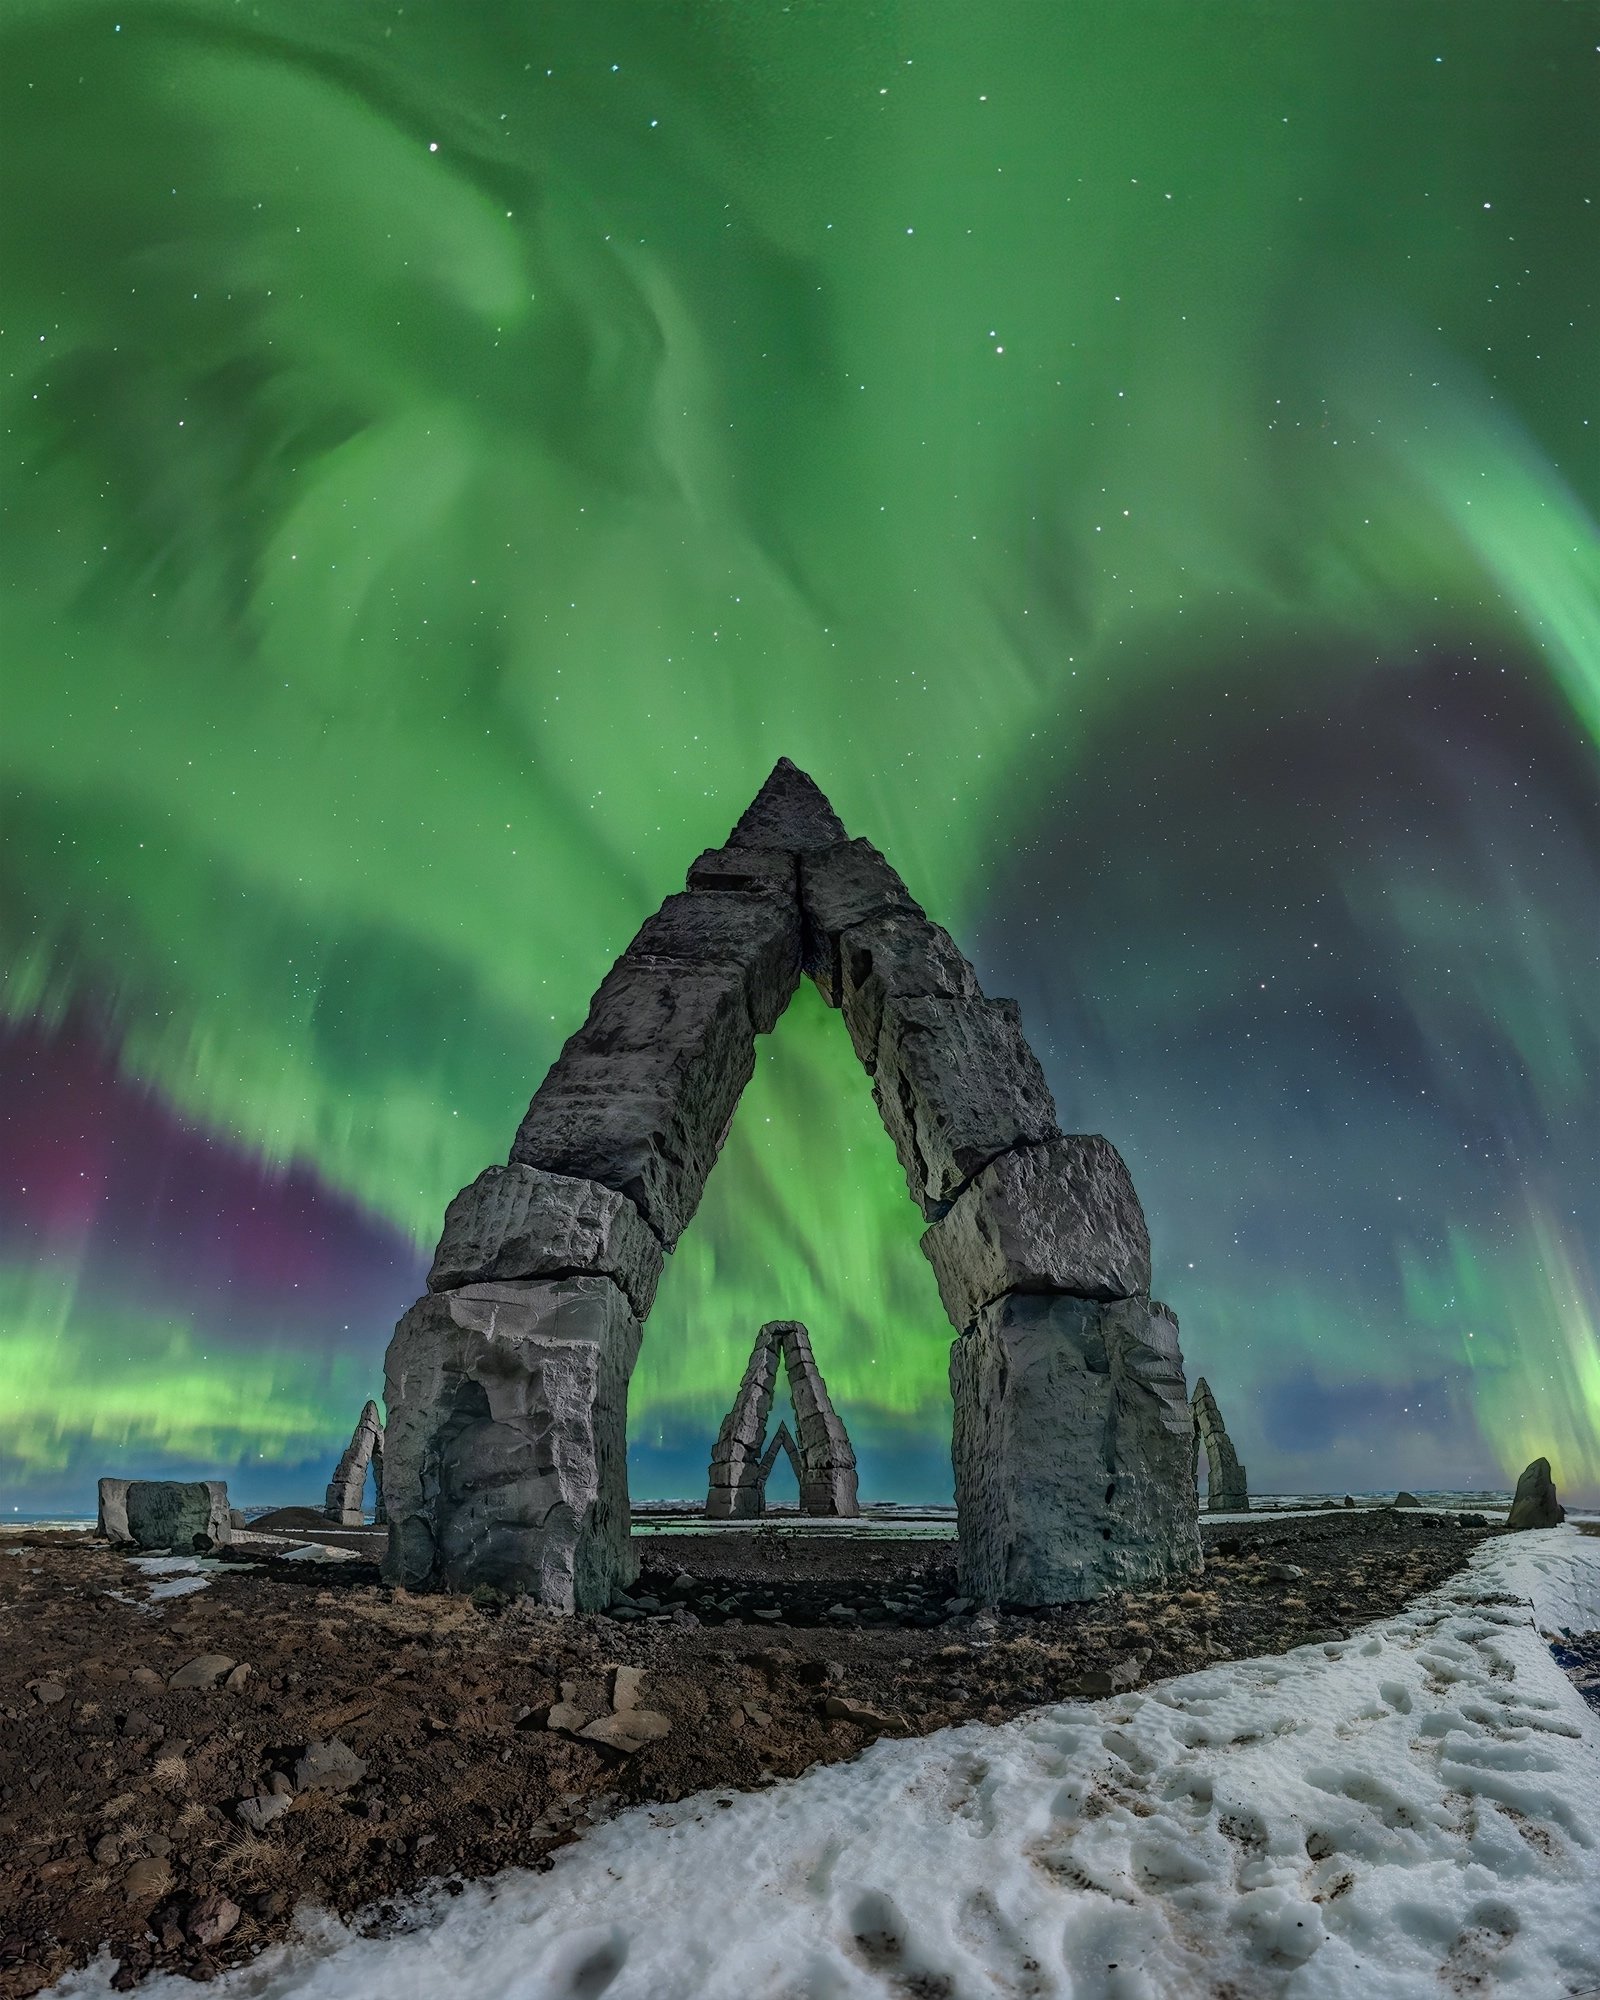 A photograph of the Northern Lights filling the night sky at the Arctic Henge.